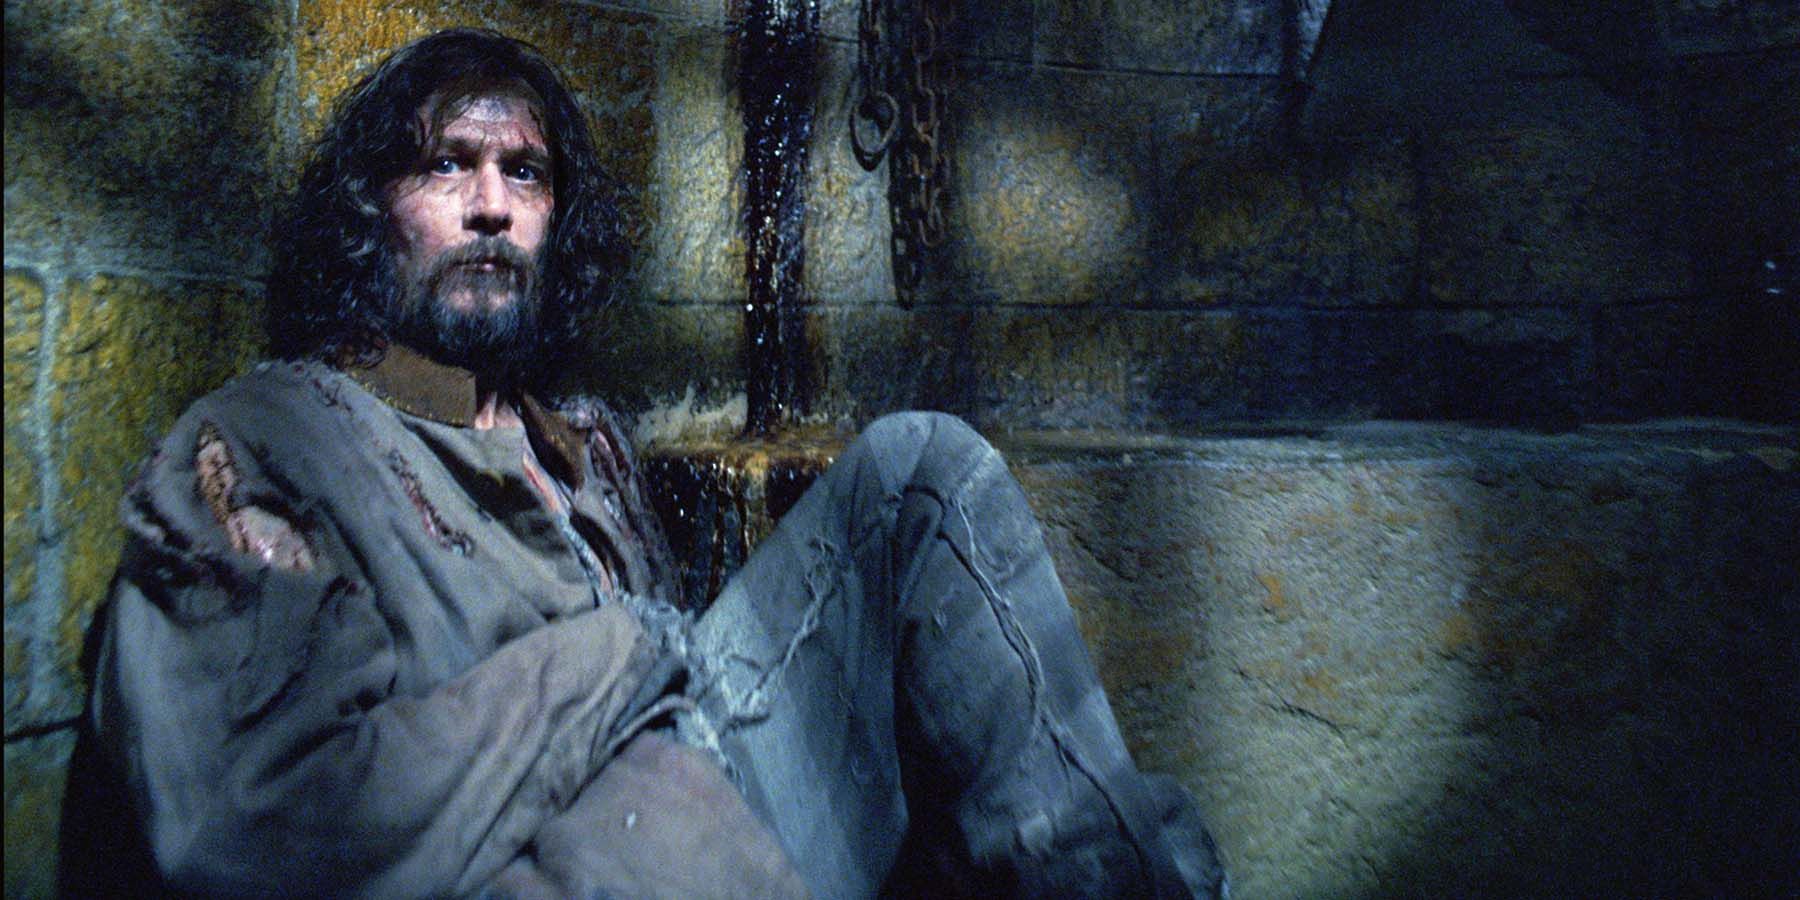 Sirius Black in a cell in Harry Potter